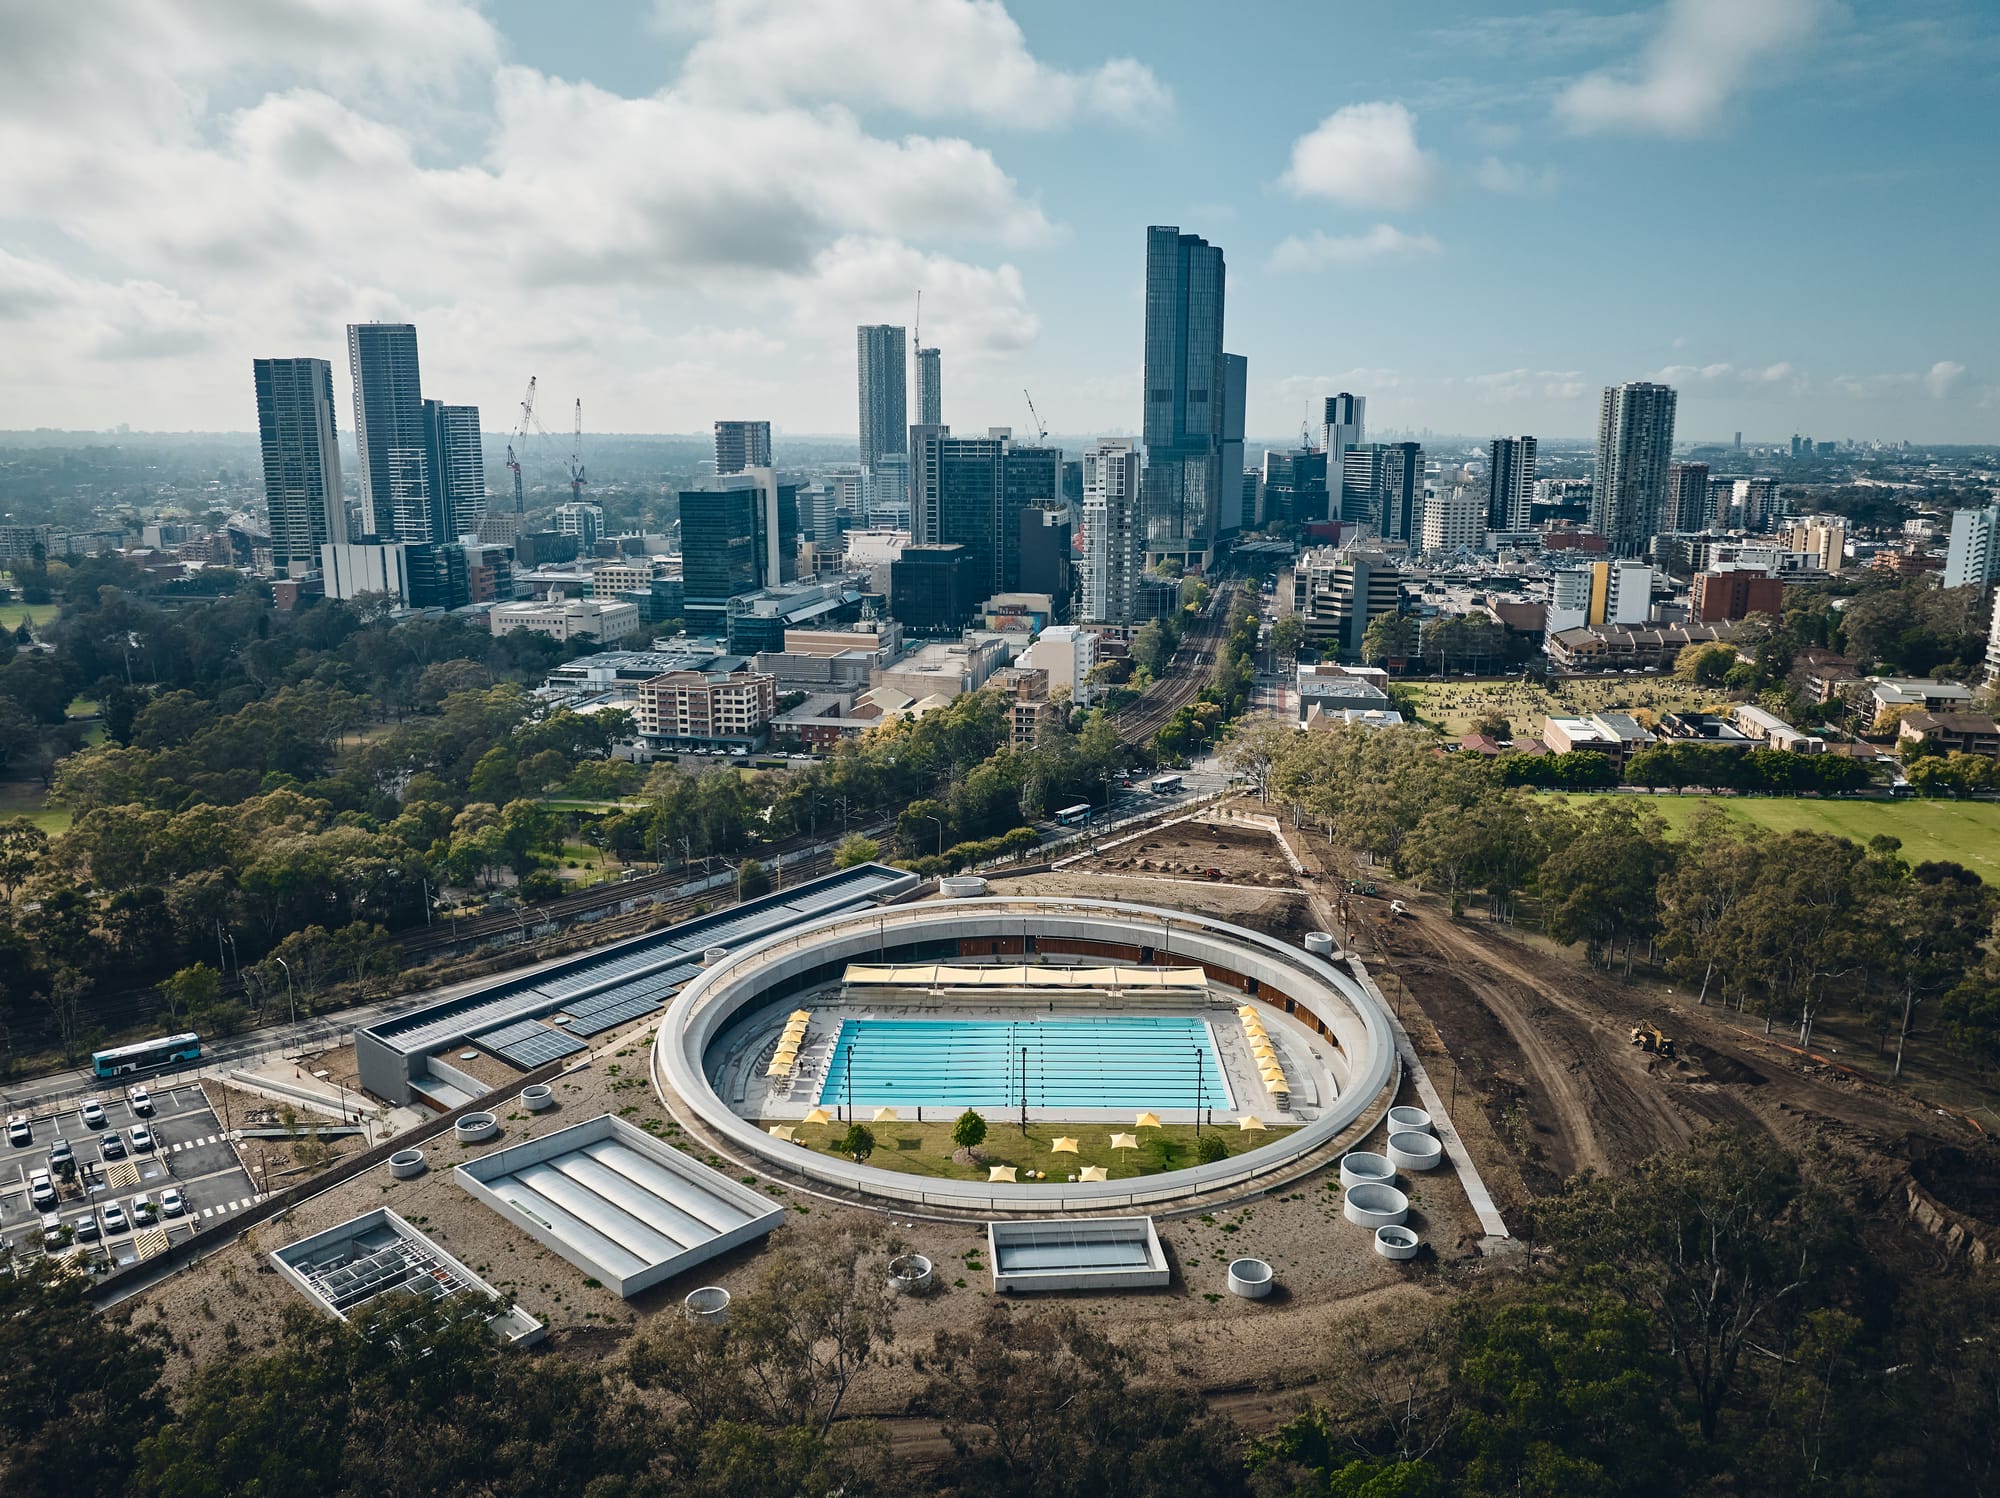 Parramatta Aquatic Centre by Mortlock Timbers. Photography by Peter Bennetts. Aerial view of outdoor public pool enclosed in large ring design. City skyline visible in background. 